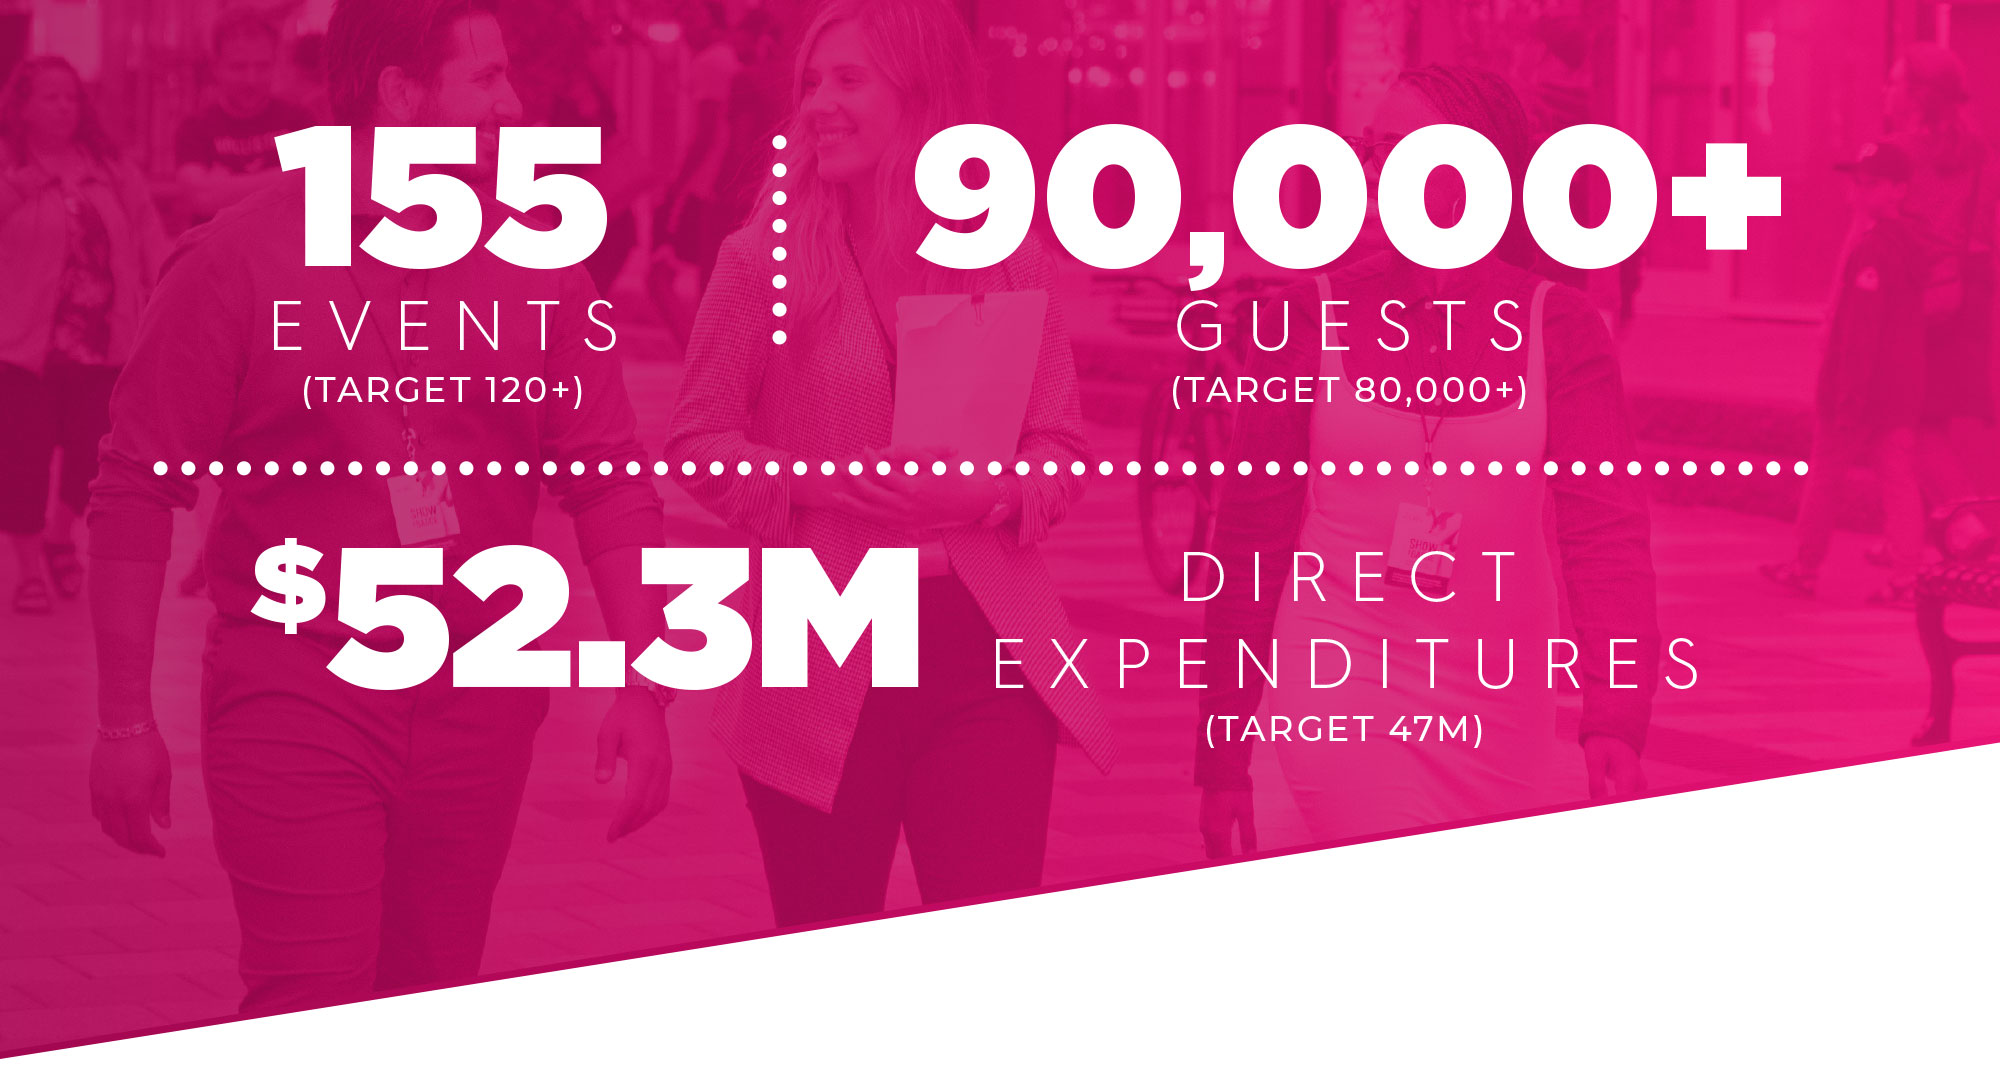 155 Events, 90,000+ Guests, 52.3 million in direct expenditures